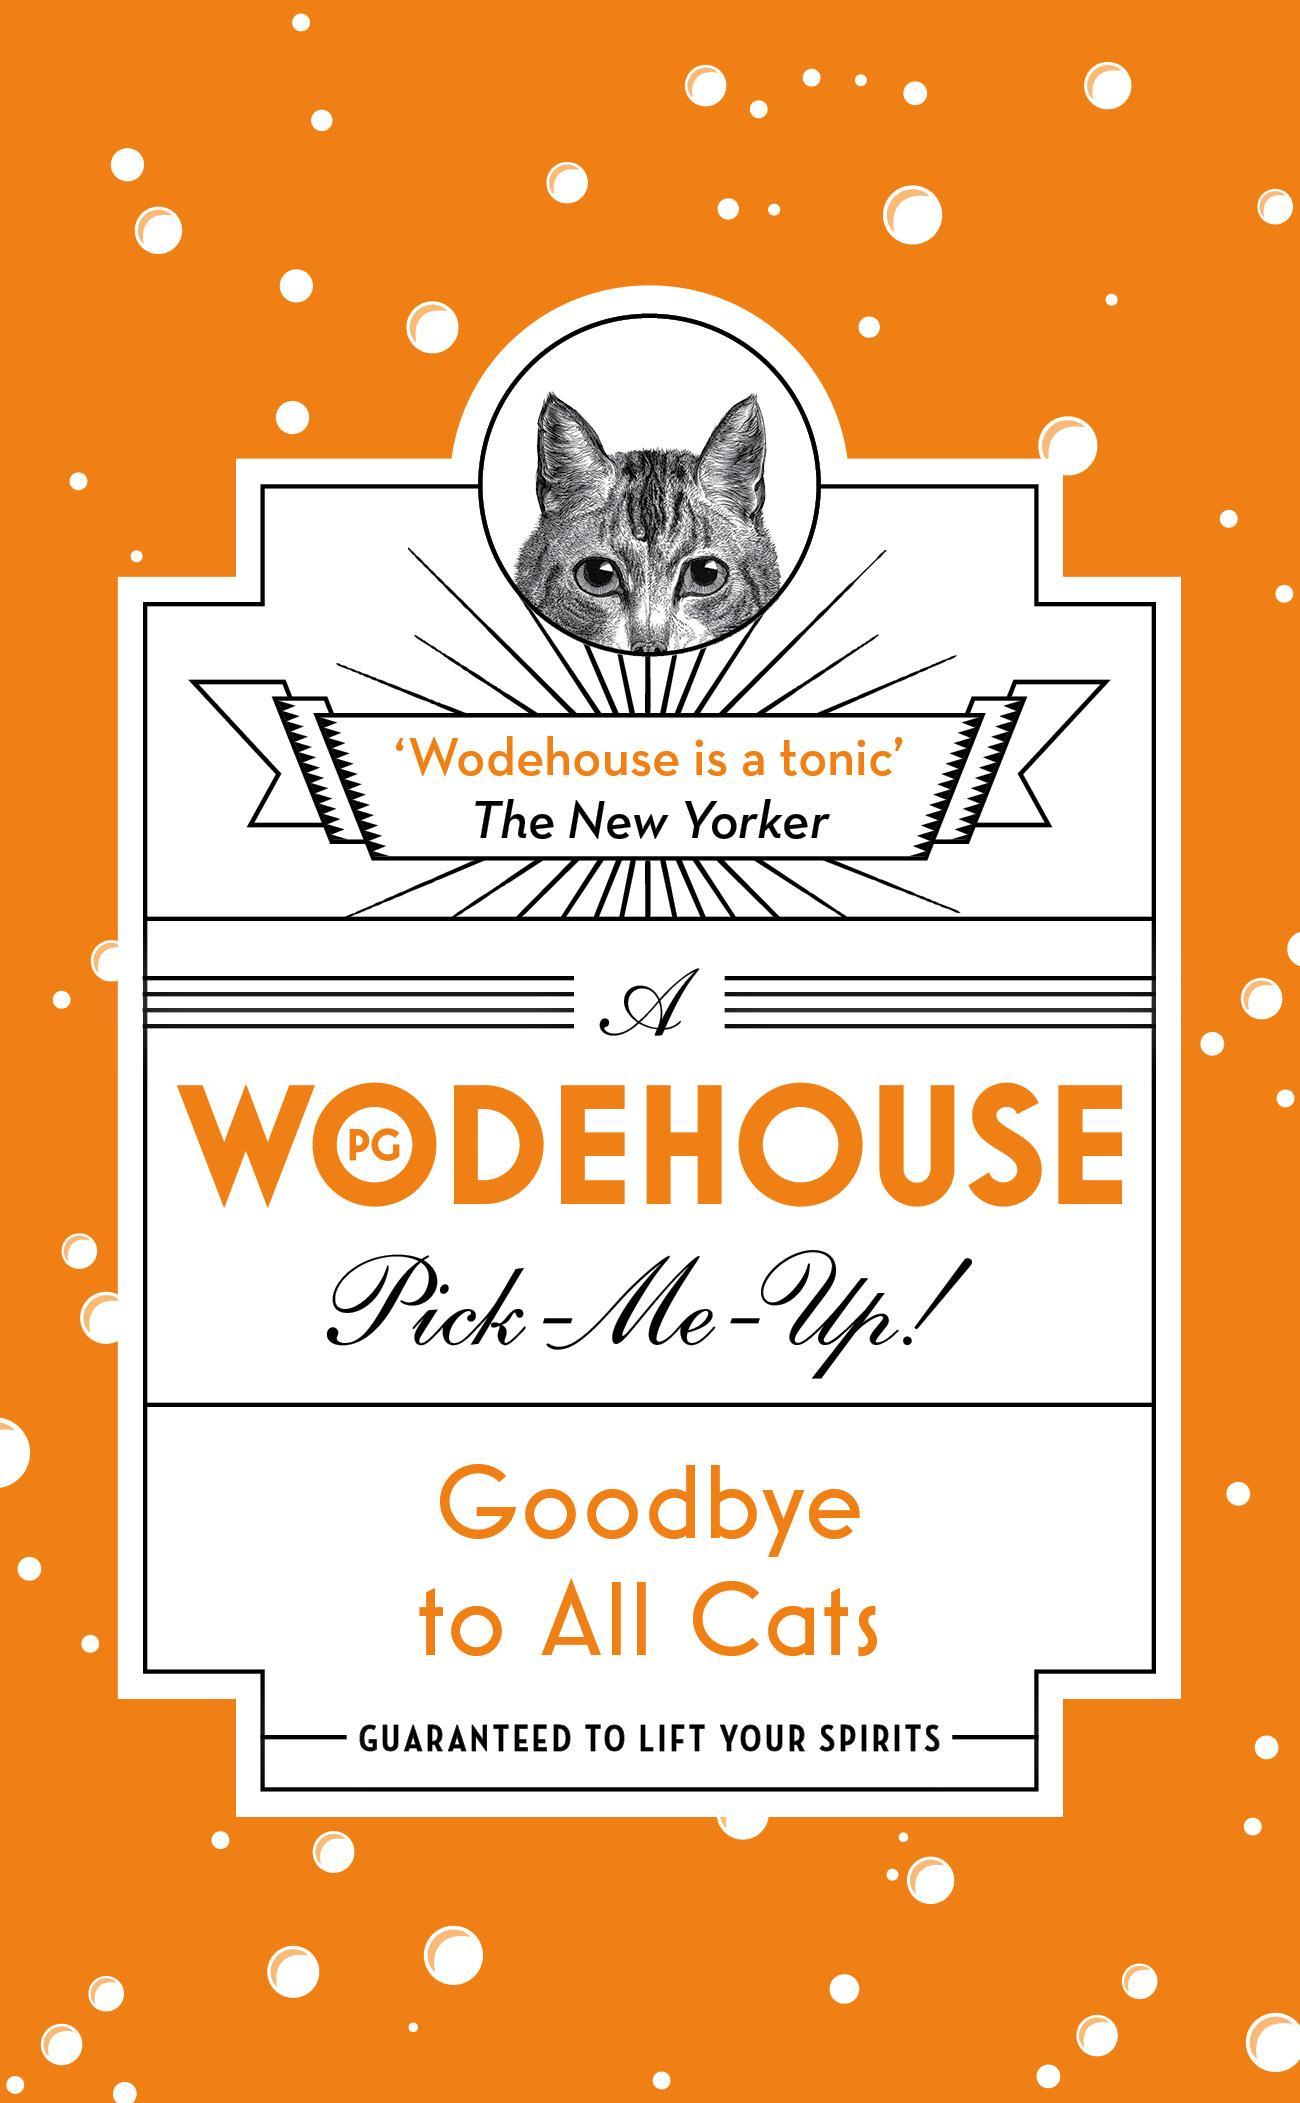 Goodbye to All Cats - PG Wodehouse